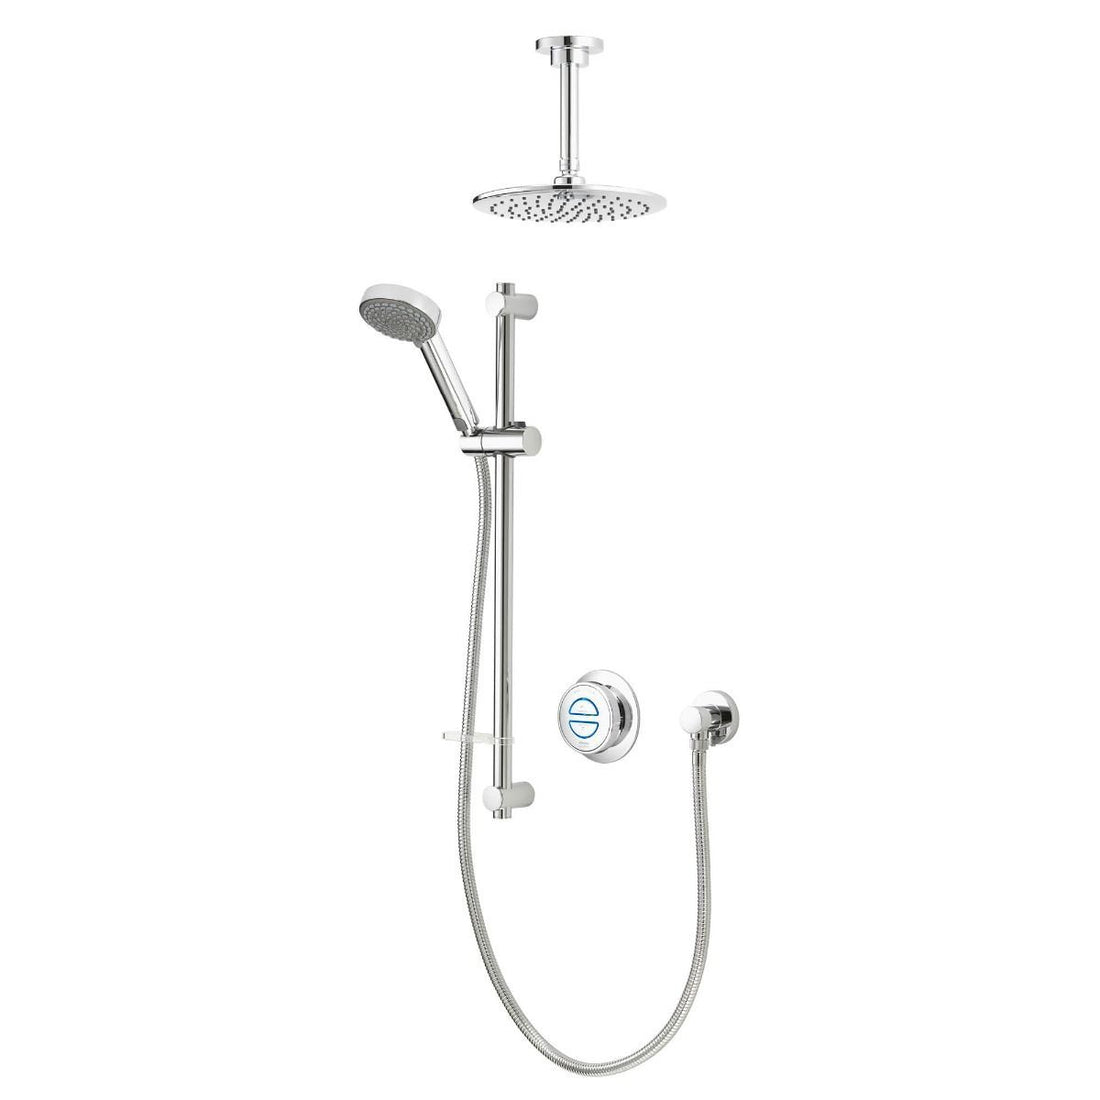 Aqualisa Quartz Classic Smart Shower - Concealed With Adjustable &amp; Ceiling Fixed Head QZD.A1.BV.DVFC.20